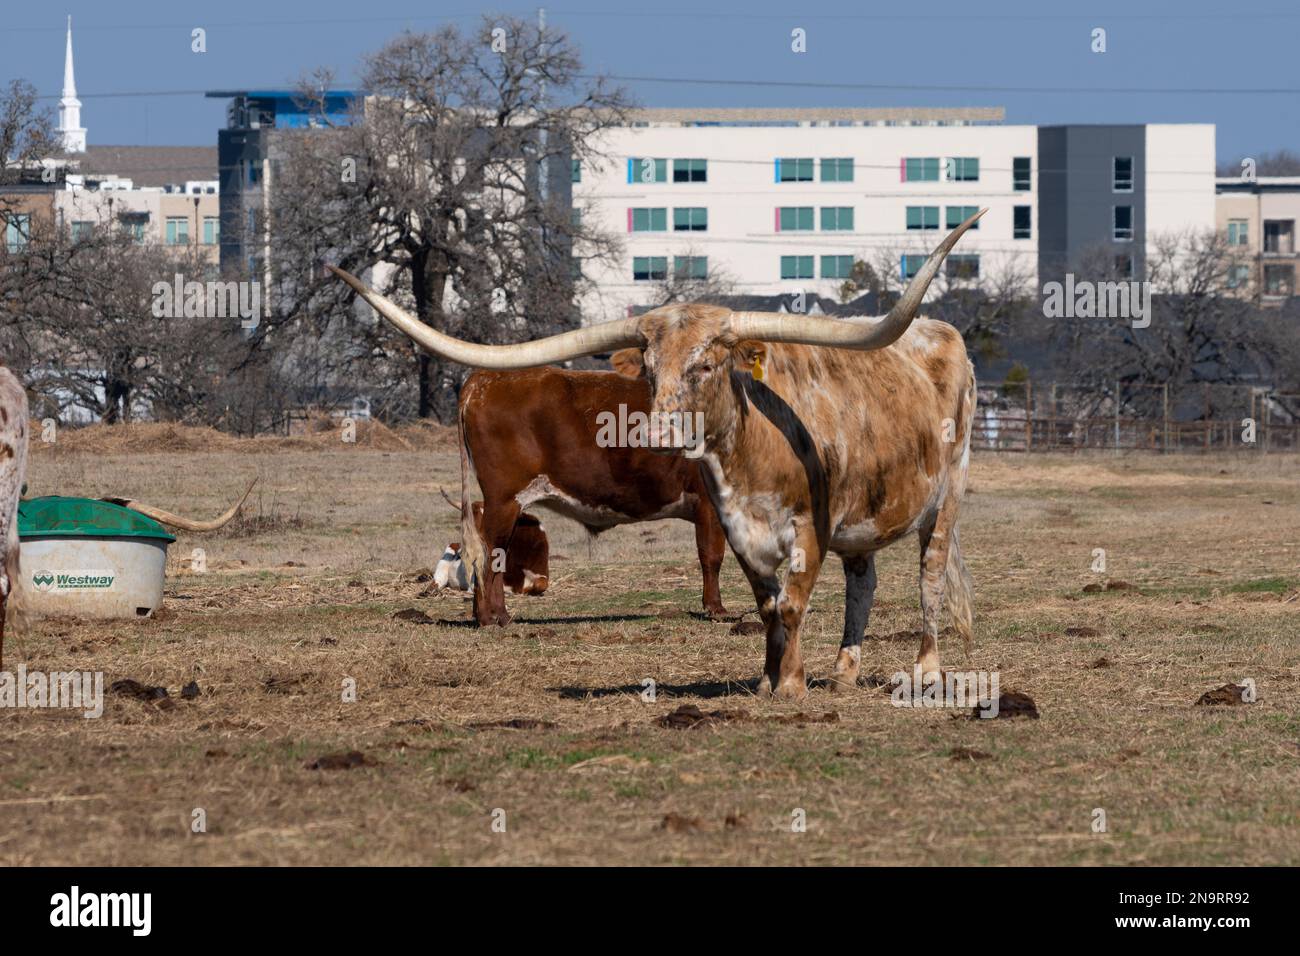 An orange and white brindle Longhorn cow standing in a suburban, ranch meadow on a sunny day with office buildings and a church steeple in the backgro Stock Photo